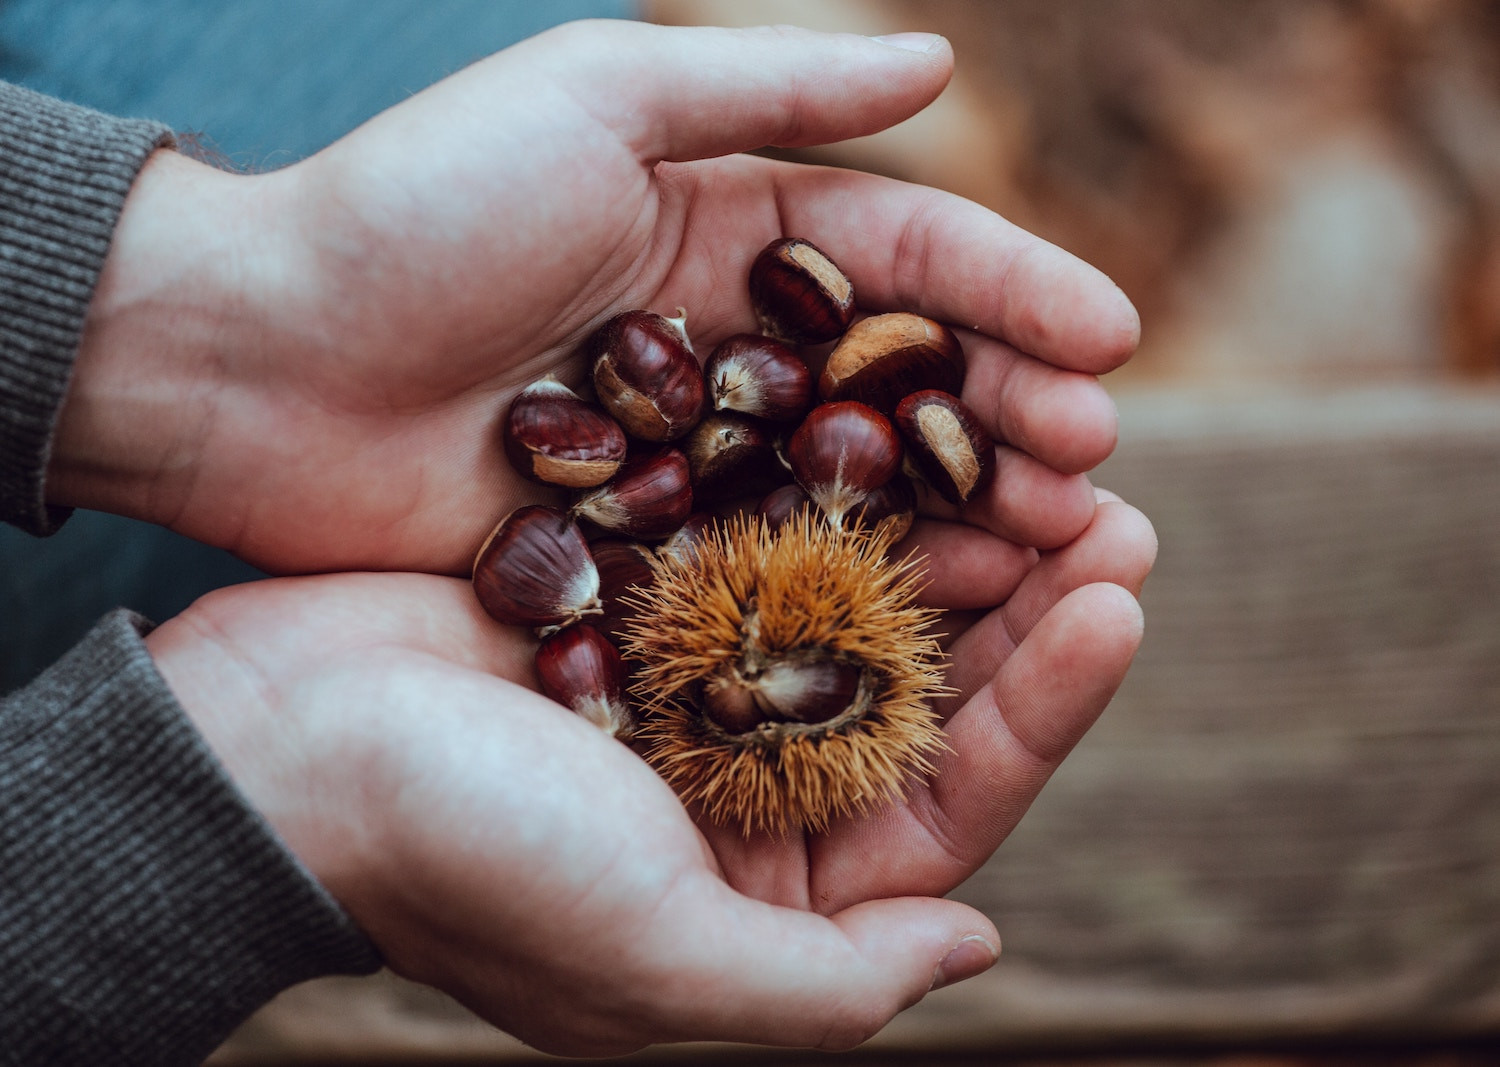 In 1996, Jerry Adams and his son Frank planted a grove of chestnut trees in the fertile sandy loam soil of Southwest Georgia. In early September, chestnuts with beautiful lush brown colored skin begin to cascade off trees and continue to fall until the first week of October. Chestnuts can also be pre-scored for customers. In 2011, Jerry planted a citrus grove (satsumas, Hamlin and Red Navel oranges, Meyers lemon, grapefruits).